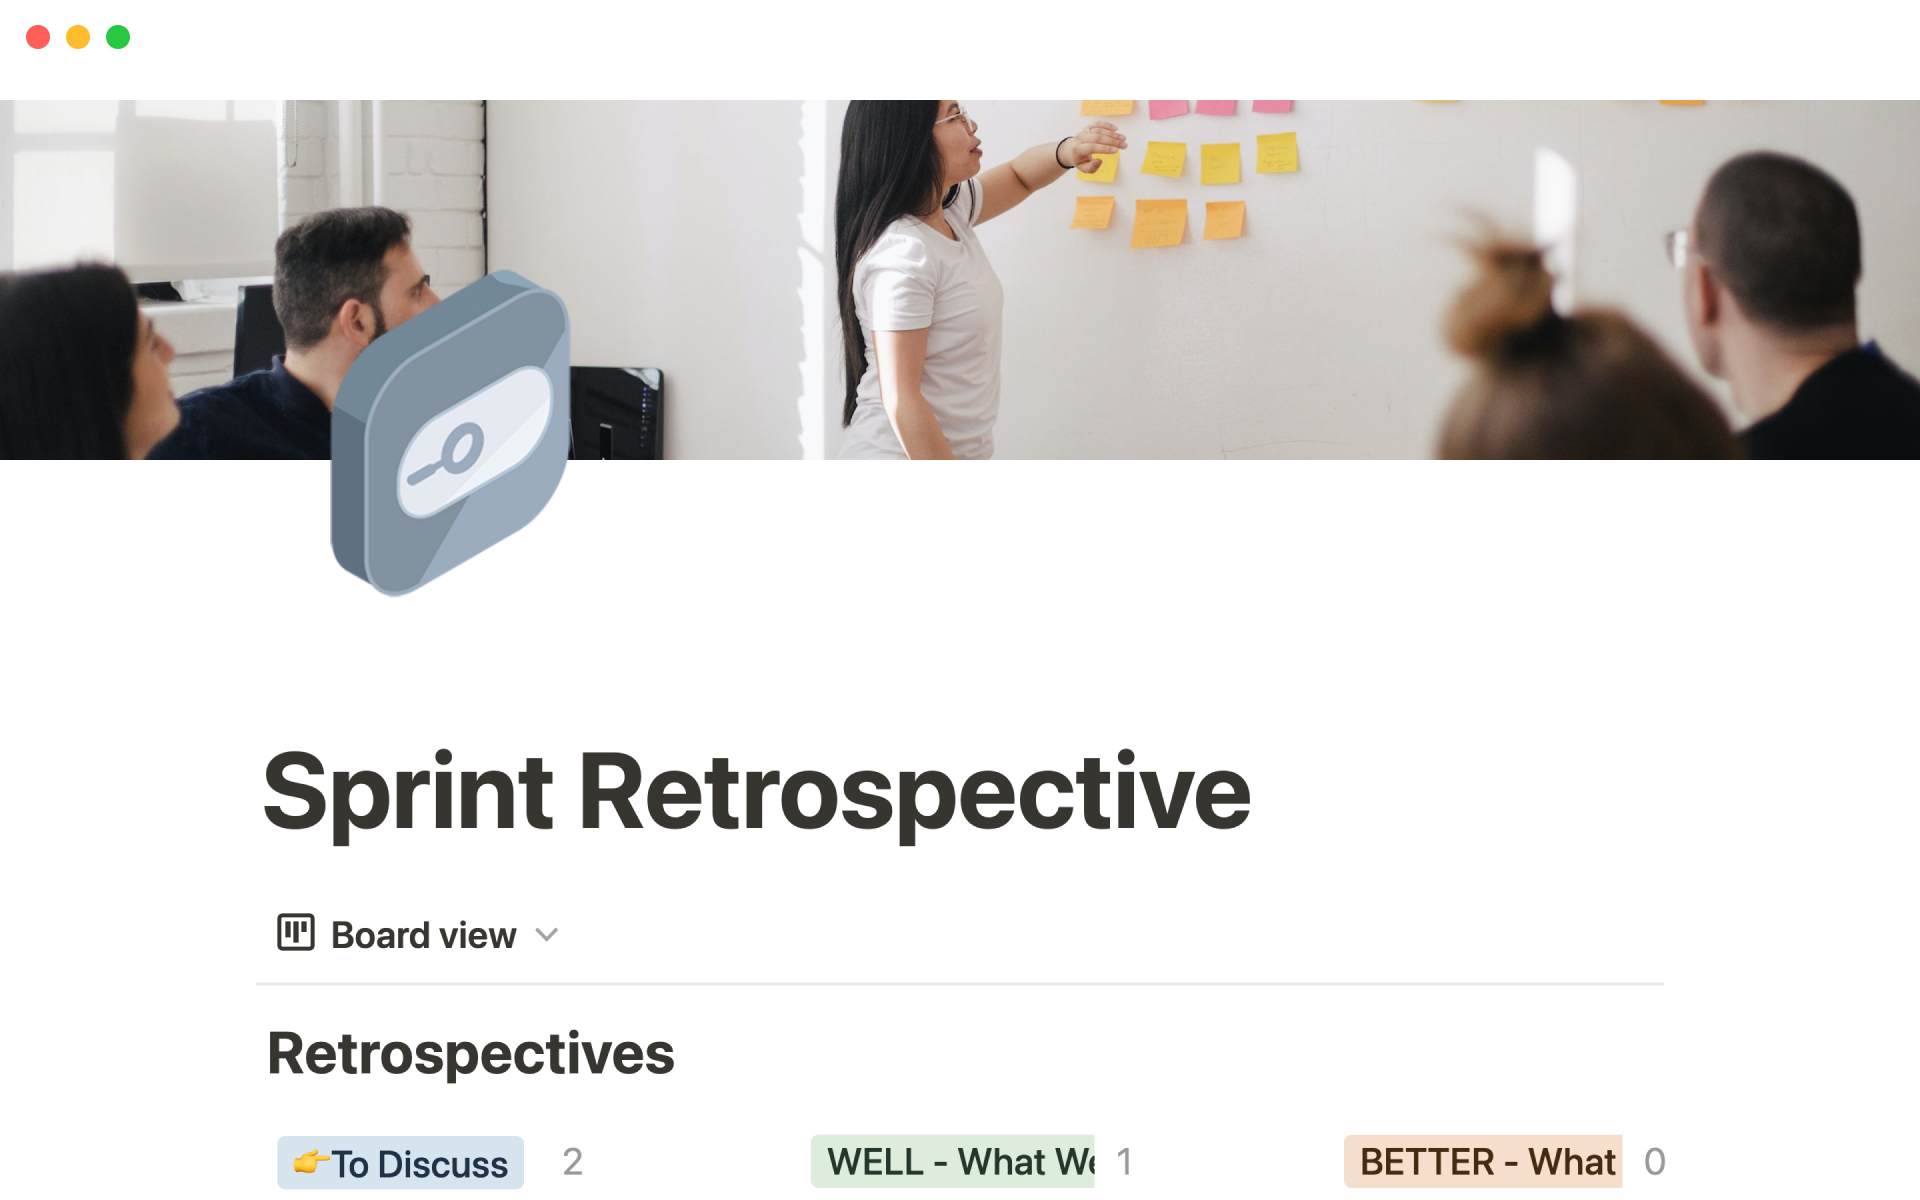 Track discussion topics, feedback, and actionable to-do’s so agile teams can continuously improve their work—without reinventing the wheel in this Sprint Retro template.